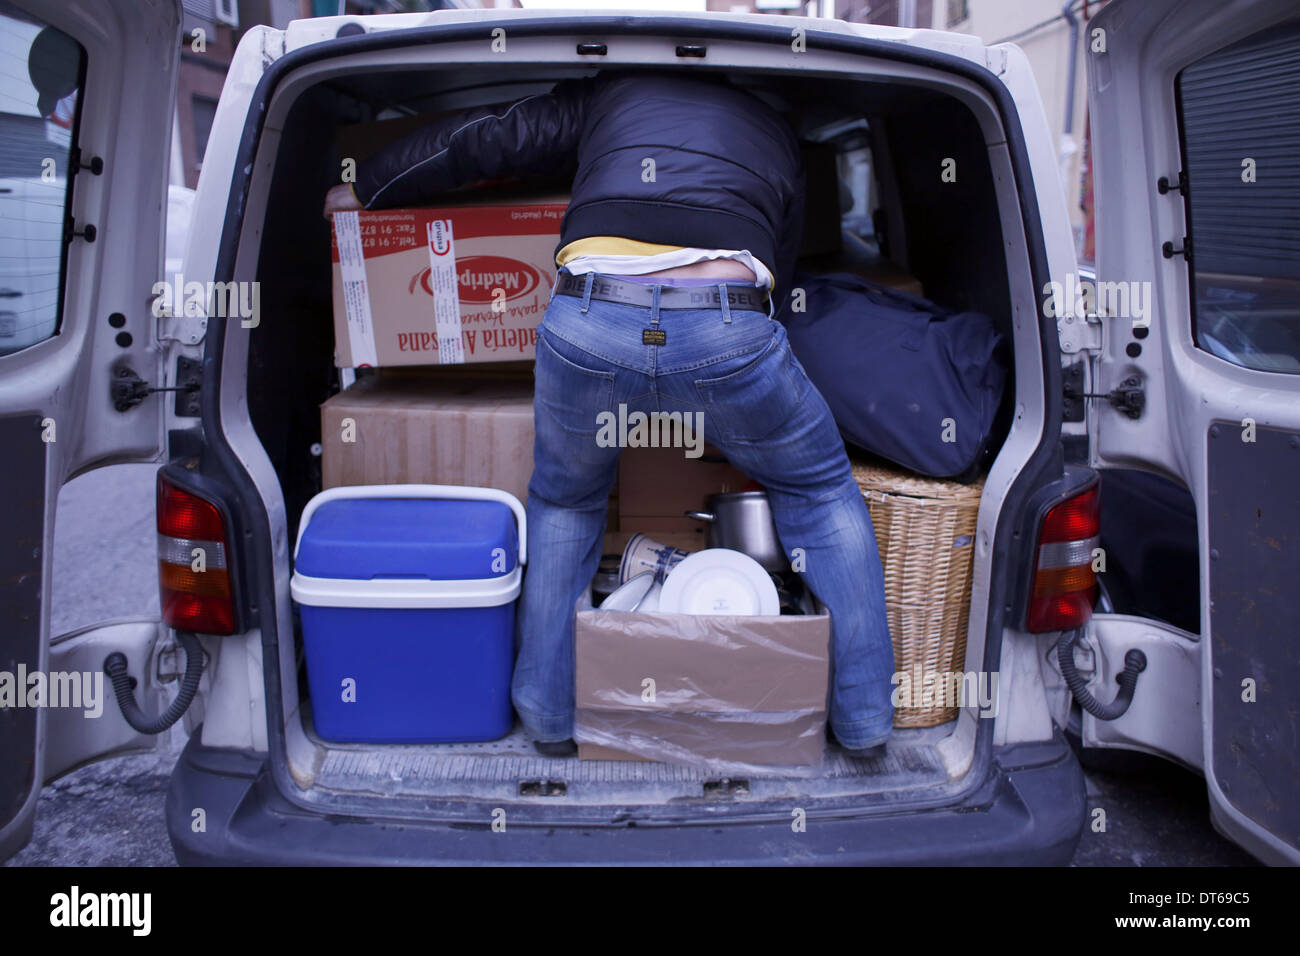 Madrid, Spain. 10th Feb, 2014. 30 year-old Iban Labici places carefully his belongings inside his van as he waits to be evicted from his home in Madrid, Spain, Monday, Feb. 10th 2014. 30 year-old Iban Labici, with his partner 29 year-old Lavinia Uta from Romania were evicted from their previous home owned by '' La Caixa'' in 2010 when they lost their jobs due to the financial crisis. Iban's brother, 38 year-old Mihail Labici offered them one of his two homes whose mortgages were contracted with Banco Sabadell. 38 year-old Mihail Labici in the past led a construction company that went bankrupt Stock Photo